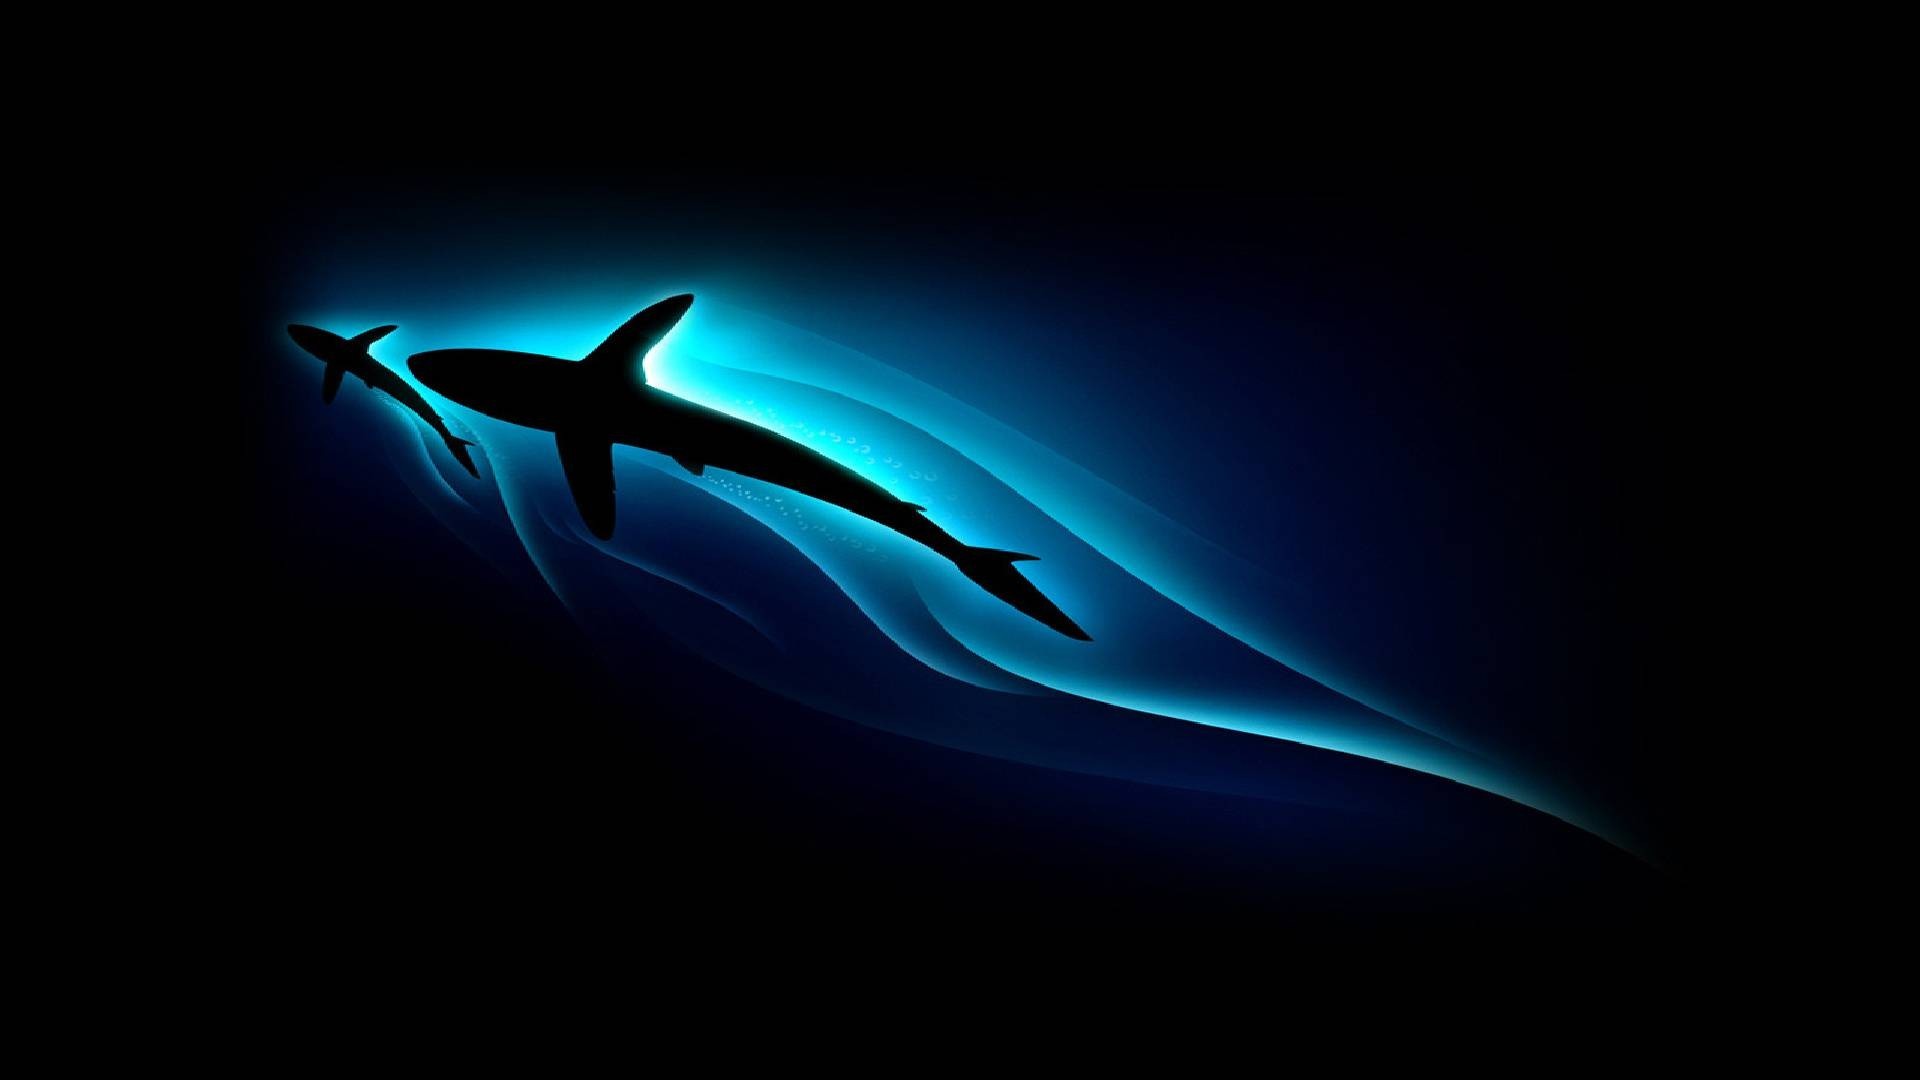 Best Coolest Wallpaper with high-resolution 1920x1080 pixel. You can use this wallpaper for your Windows and Mac OS computers as well as your Android and iPhone smartphones